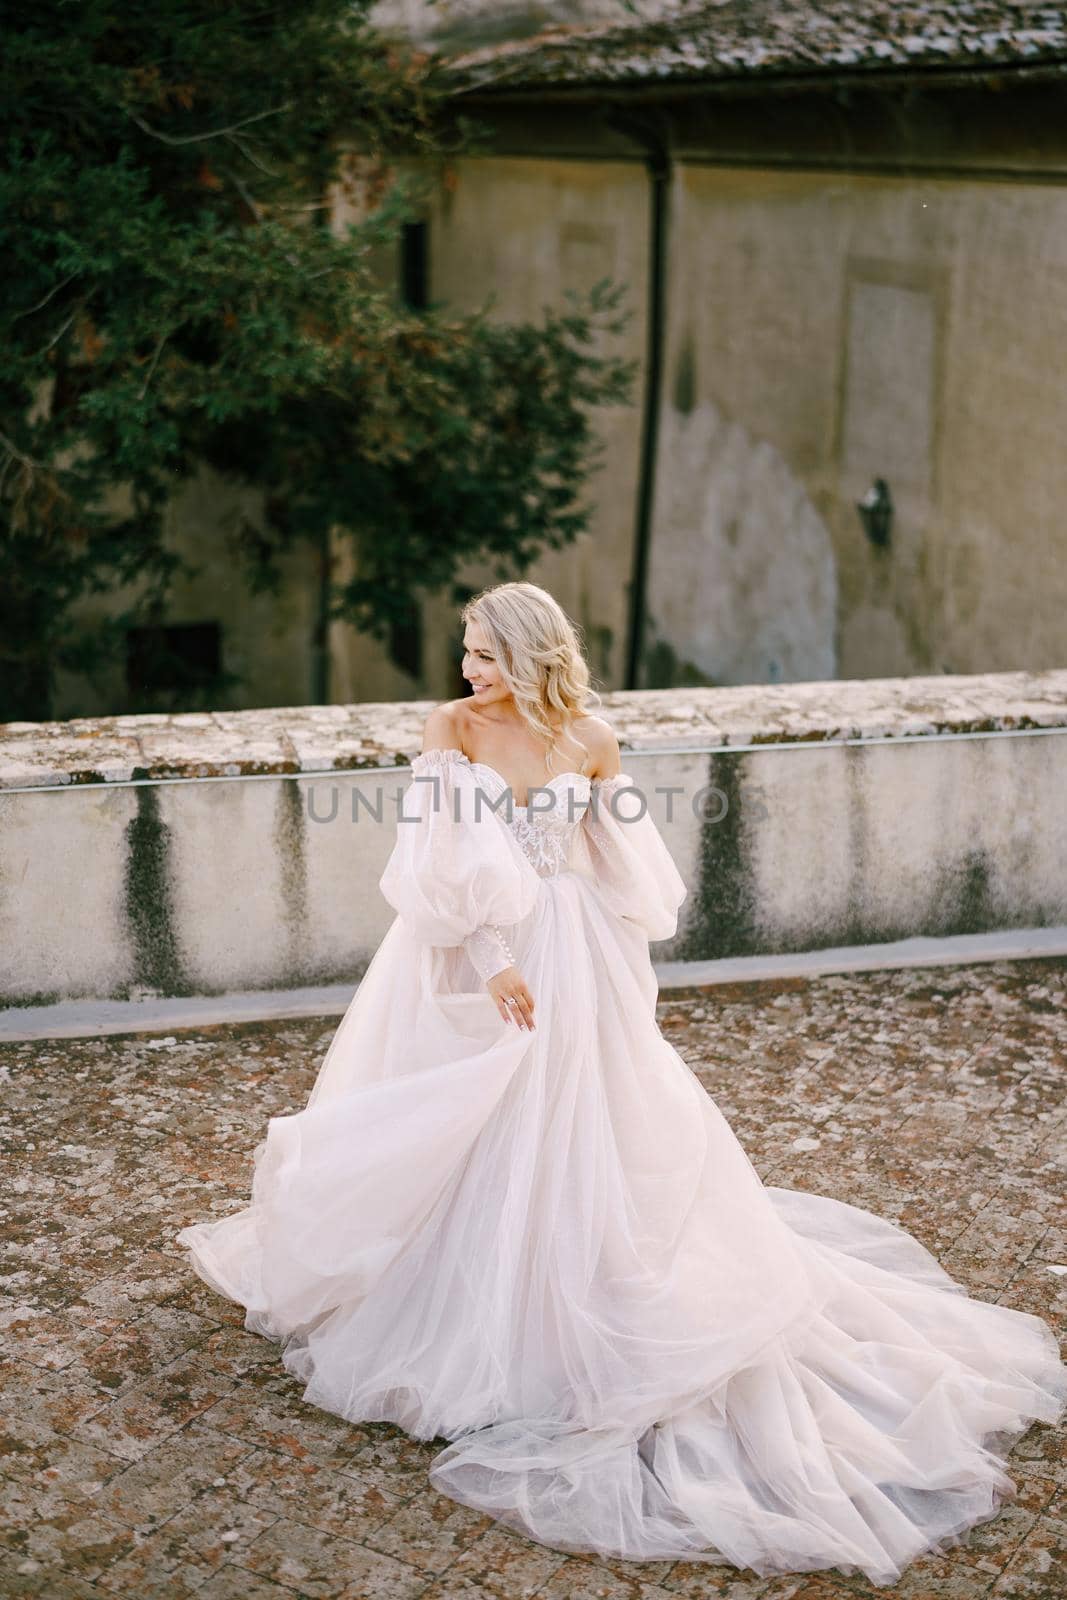 Wedding at an old winery villa in Tuscany, Italy. Bride in a white dress with bare shoulders and sleeves.